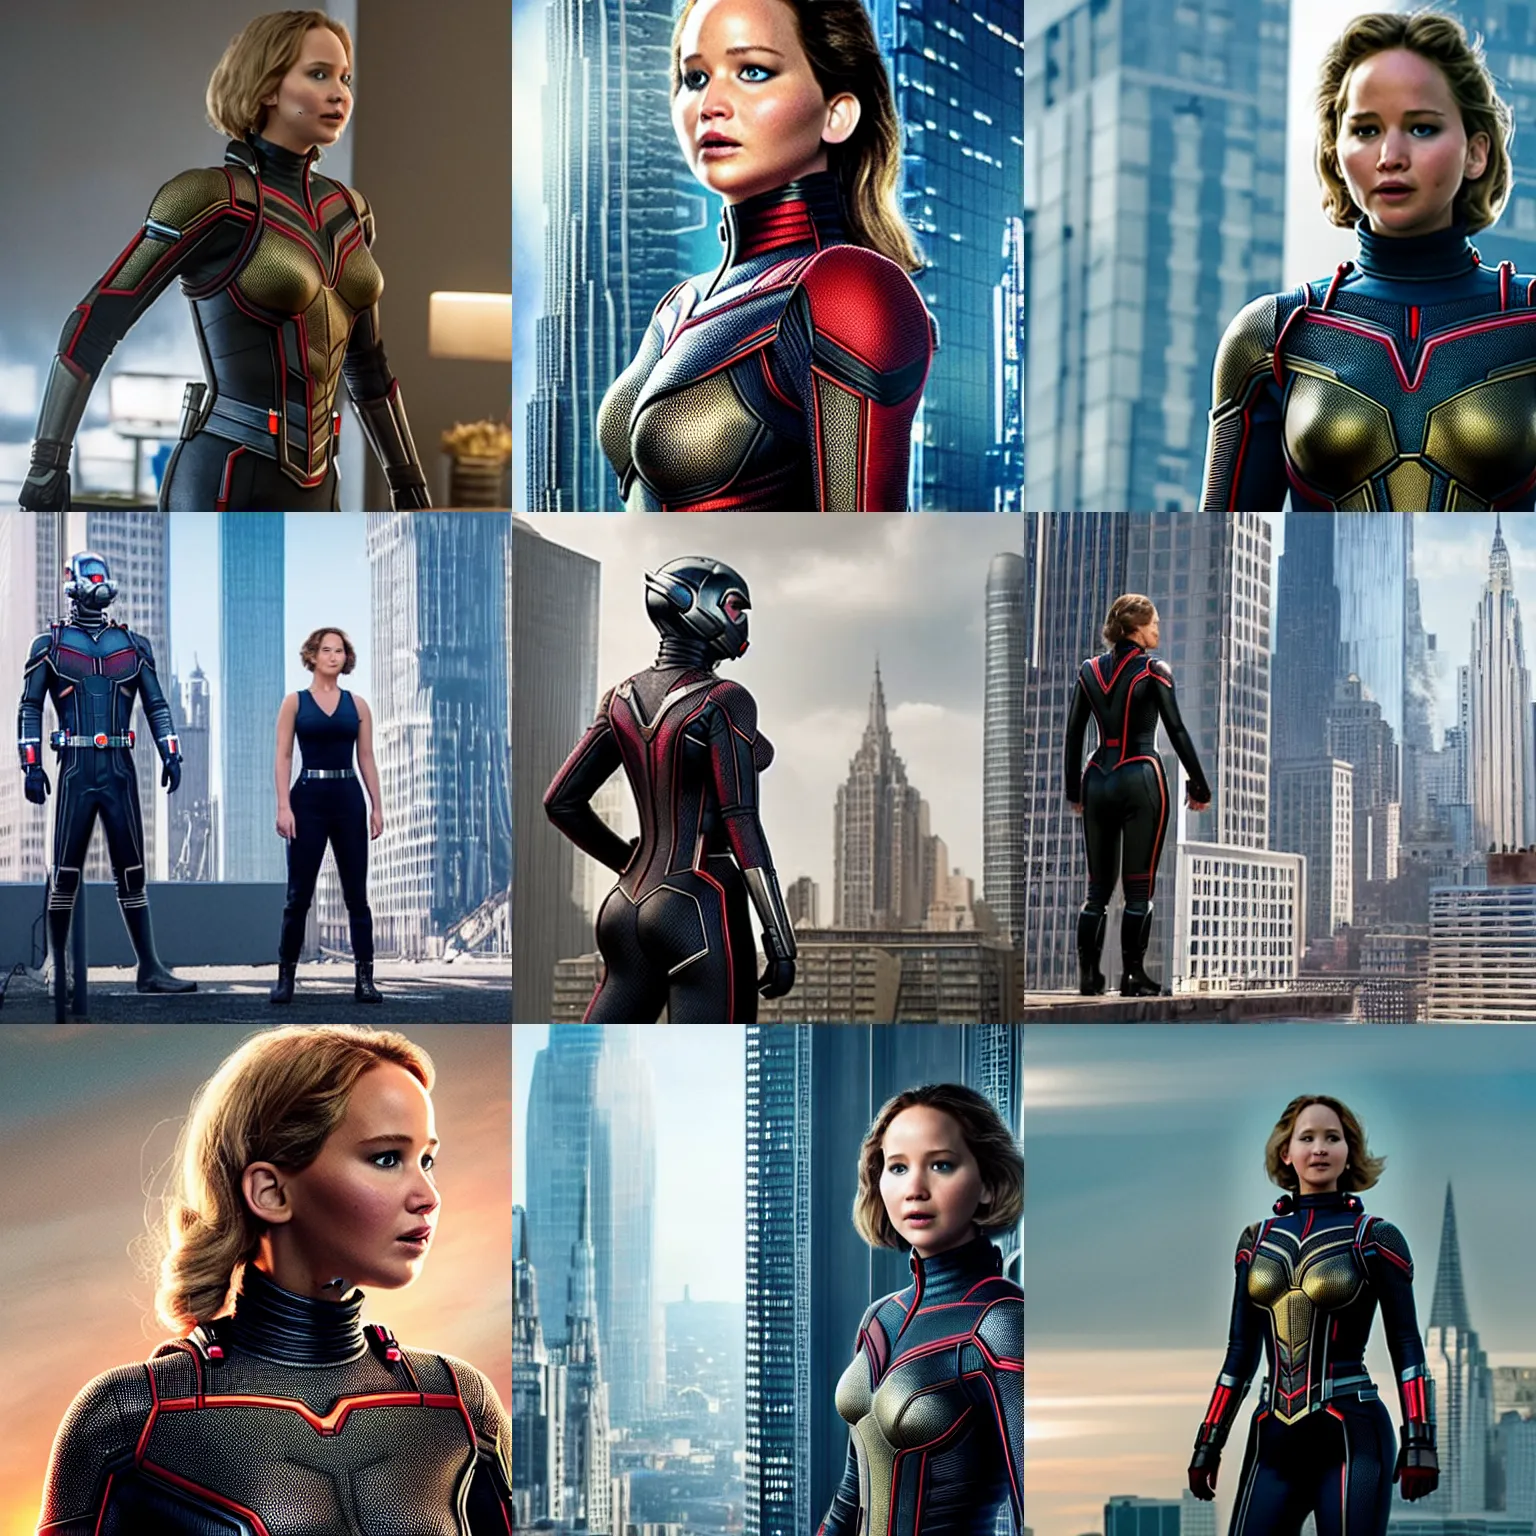 Prompt: Jennifer Lawrence grows to an enormous size and towers over a city, film still from 'Ant-Man and the Wasp'